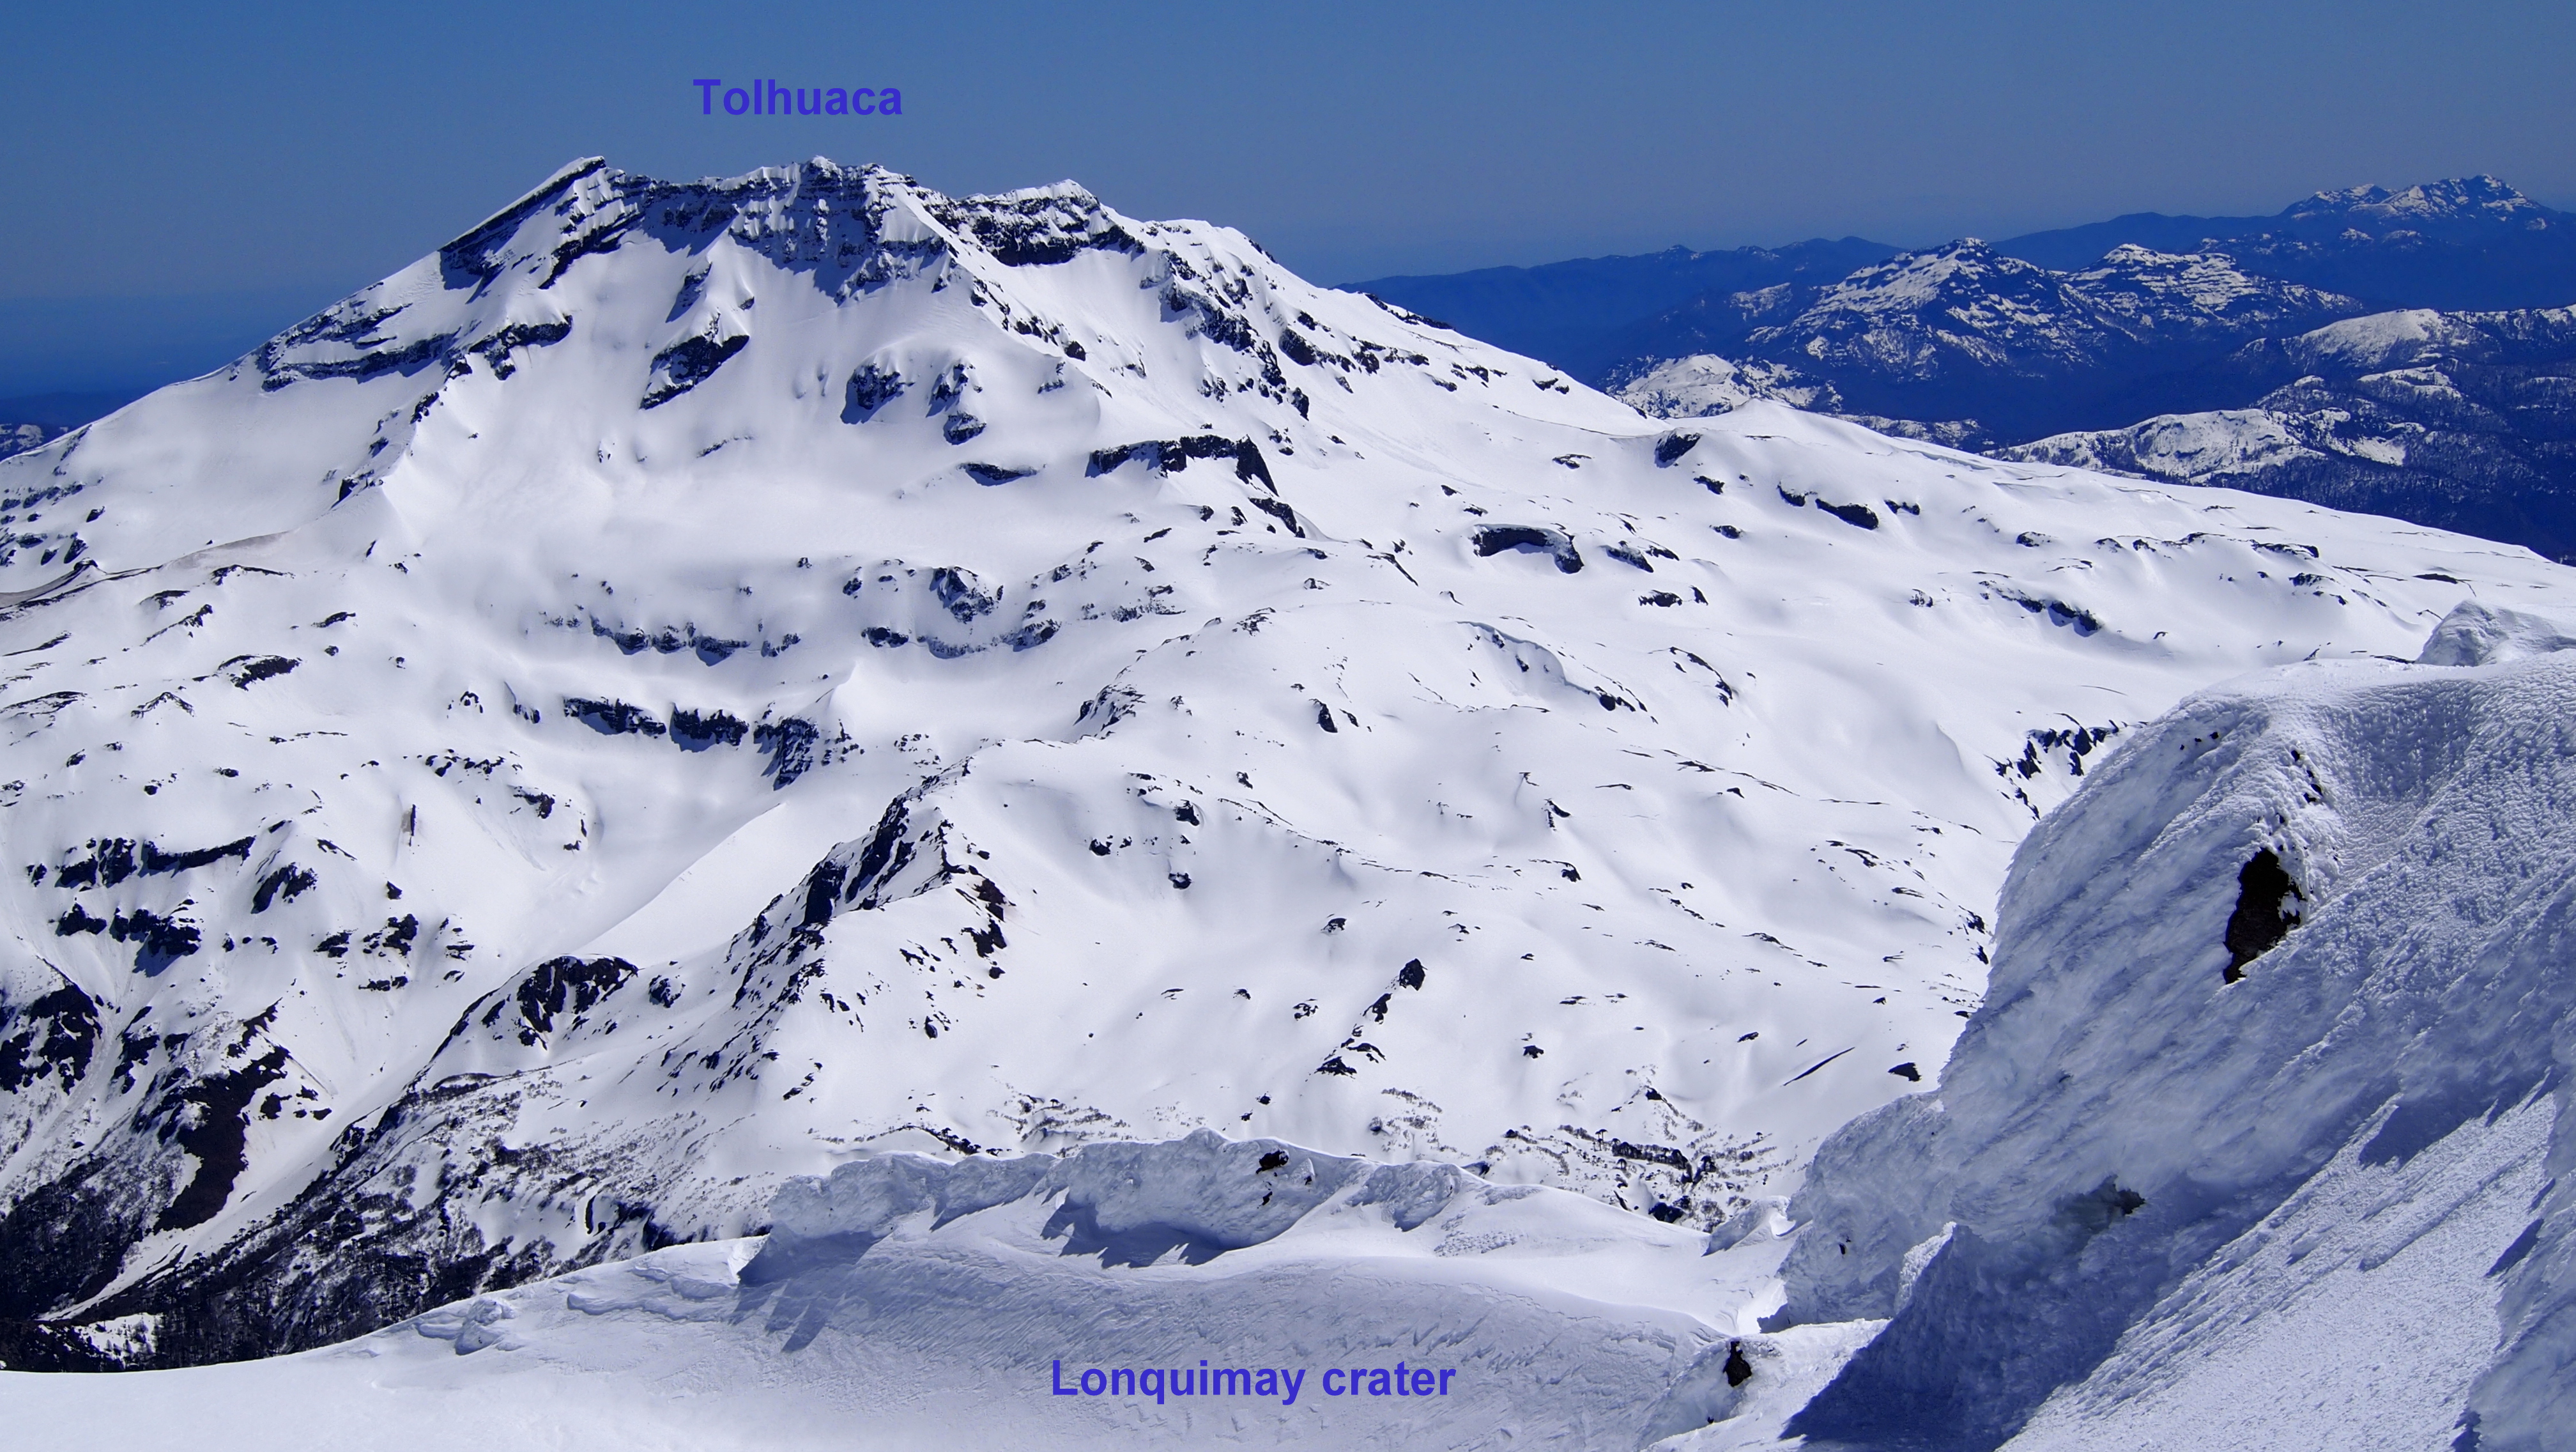 View northwest from Lonquimay crater